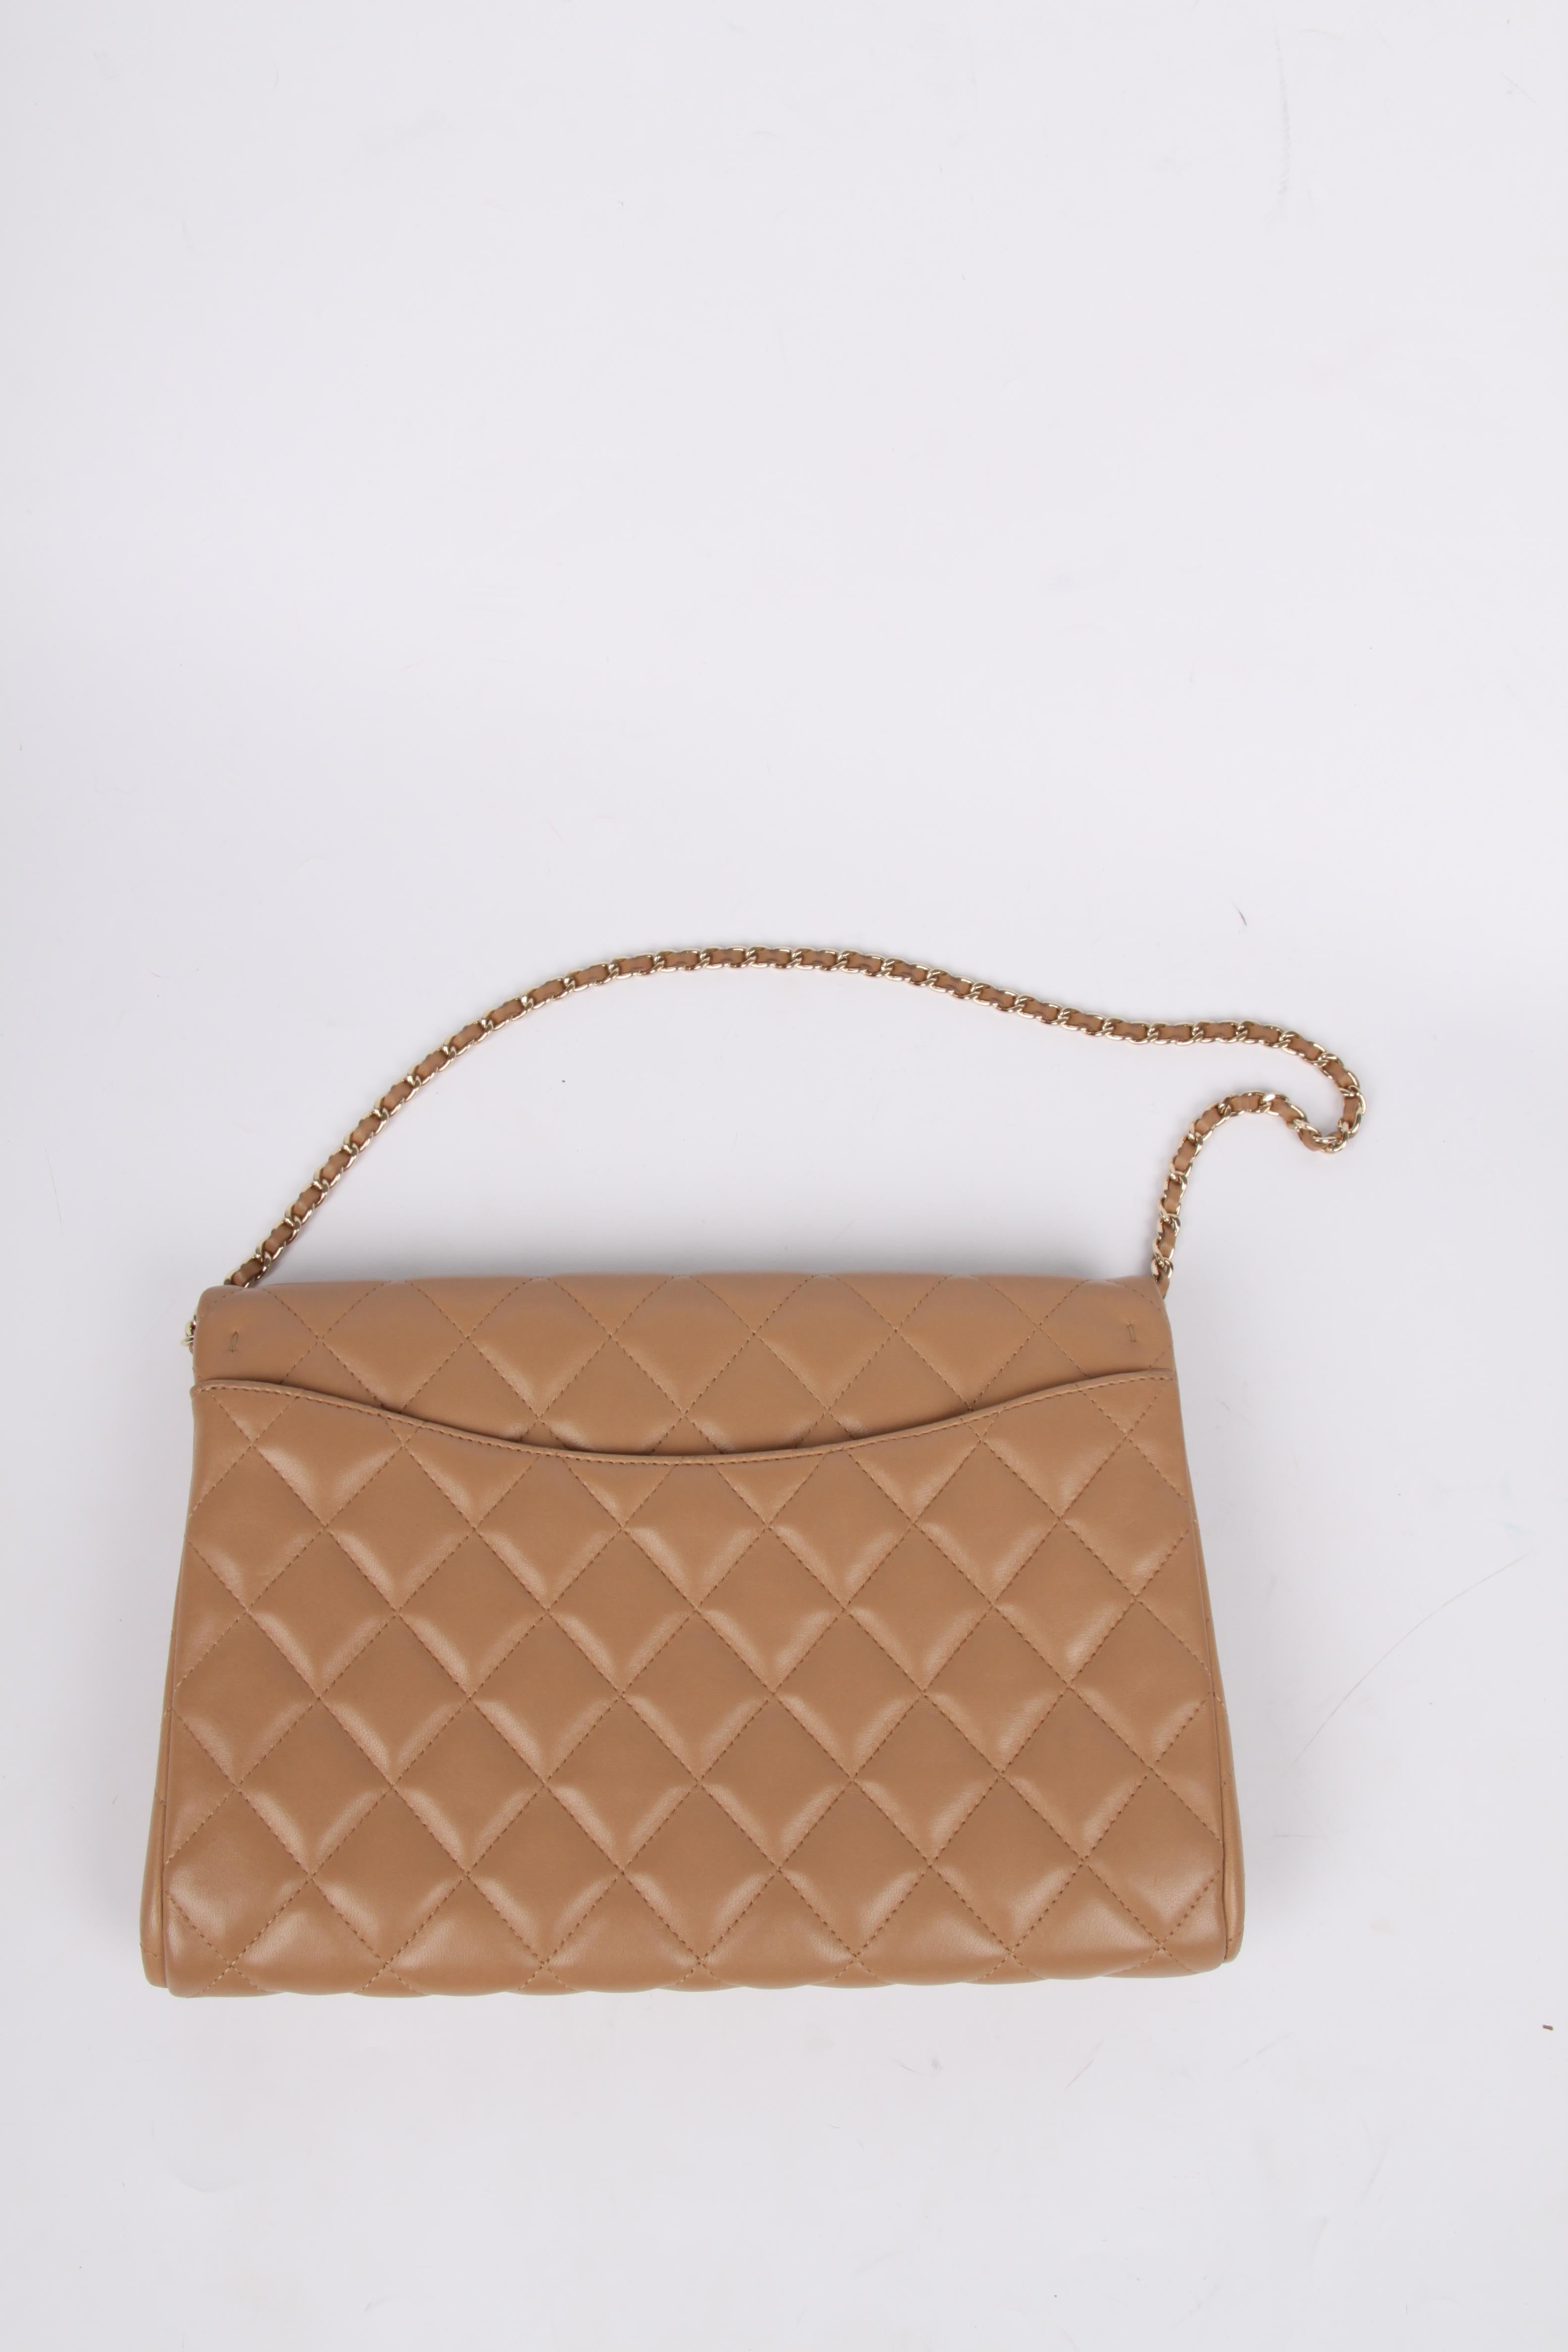 Chanel Quilted Clutch with Chain - beige 4